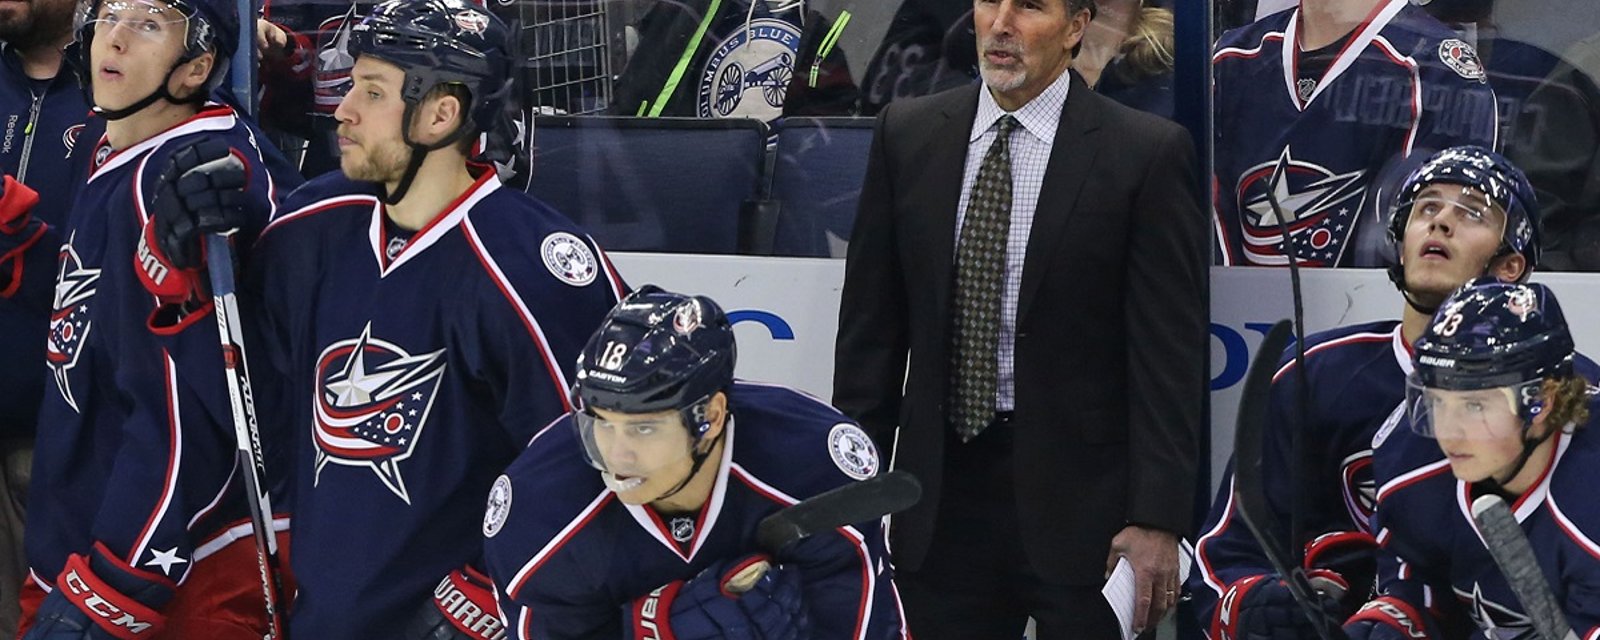 Breaking: John Tortorella will not be behind the bench tonight or at the All-Star Game.